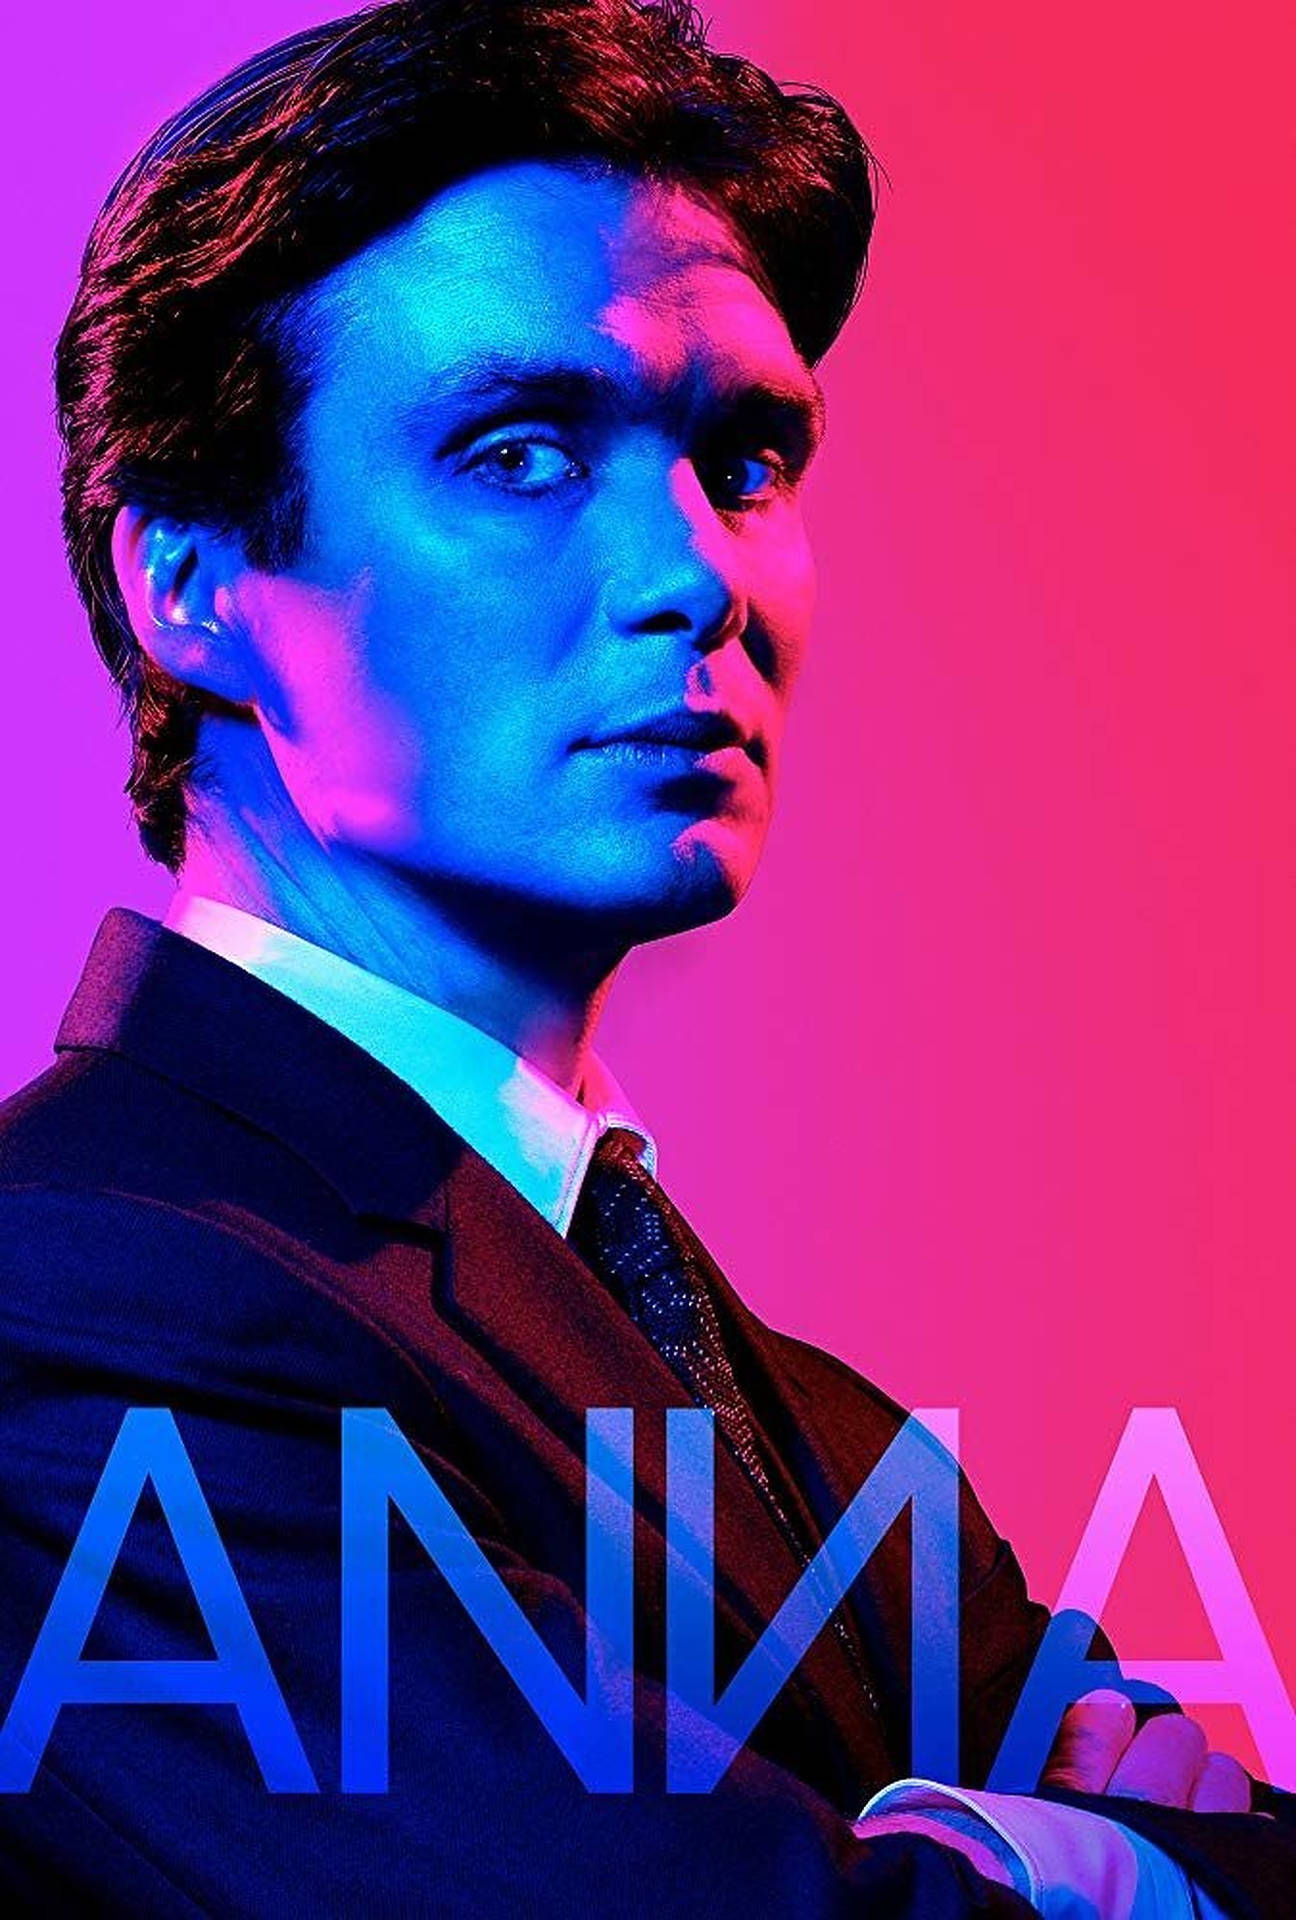 Cillianmurphy Anna Neon Art Would Be Translated To 